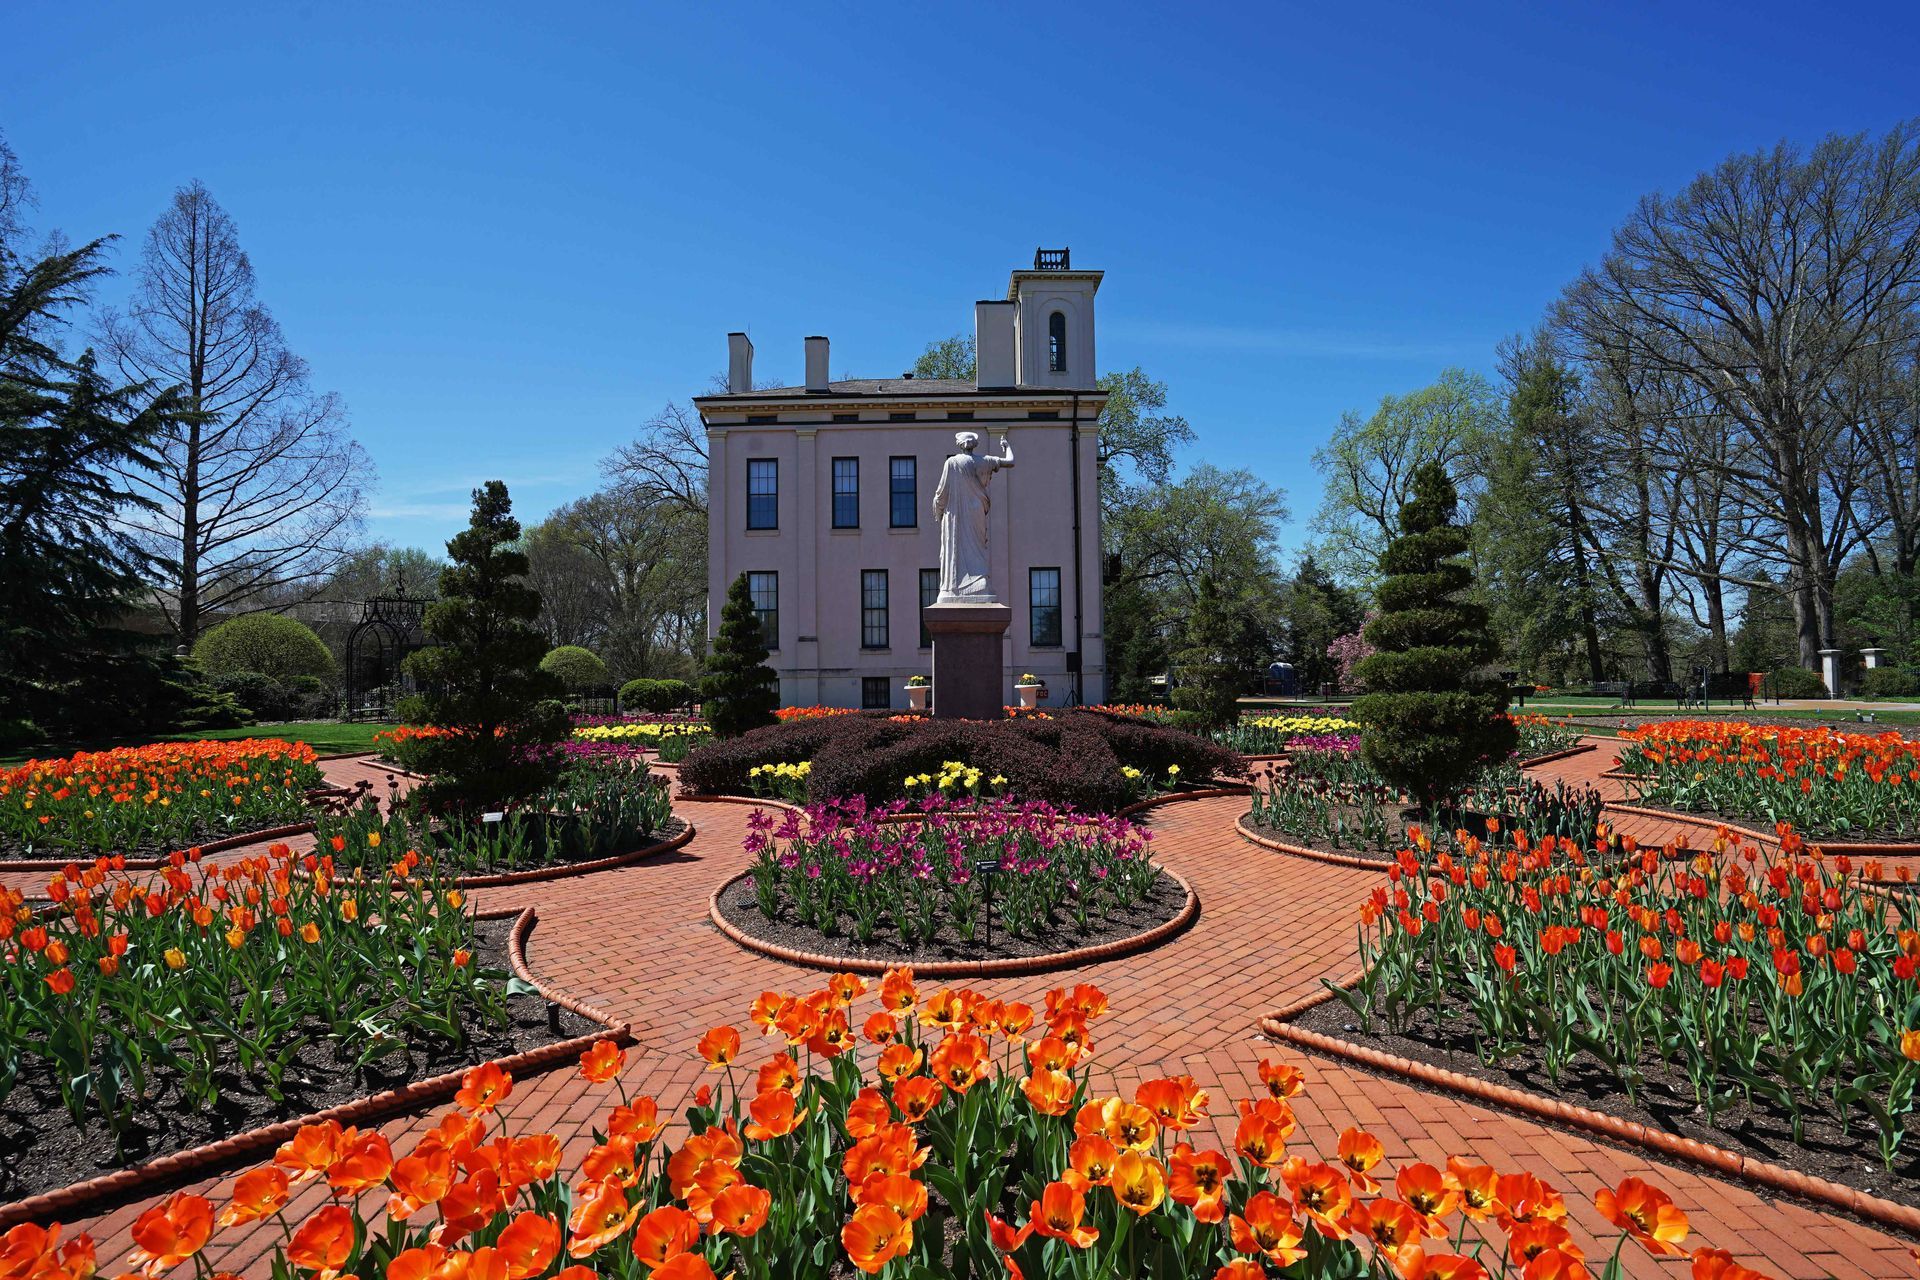 A beautiful flower garden in the courtyard of a colonial building in a St. Louis Park